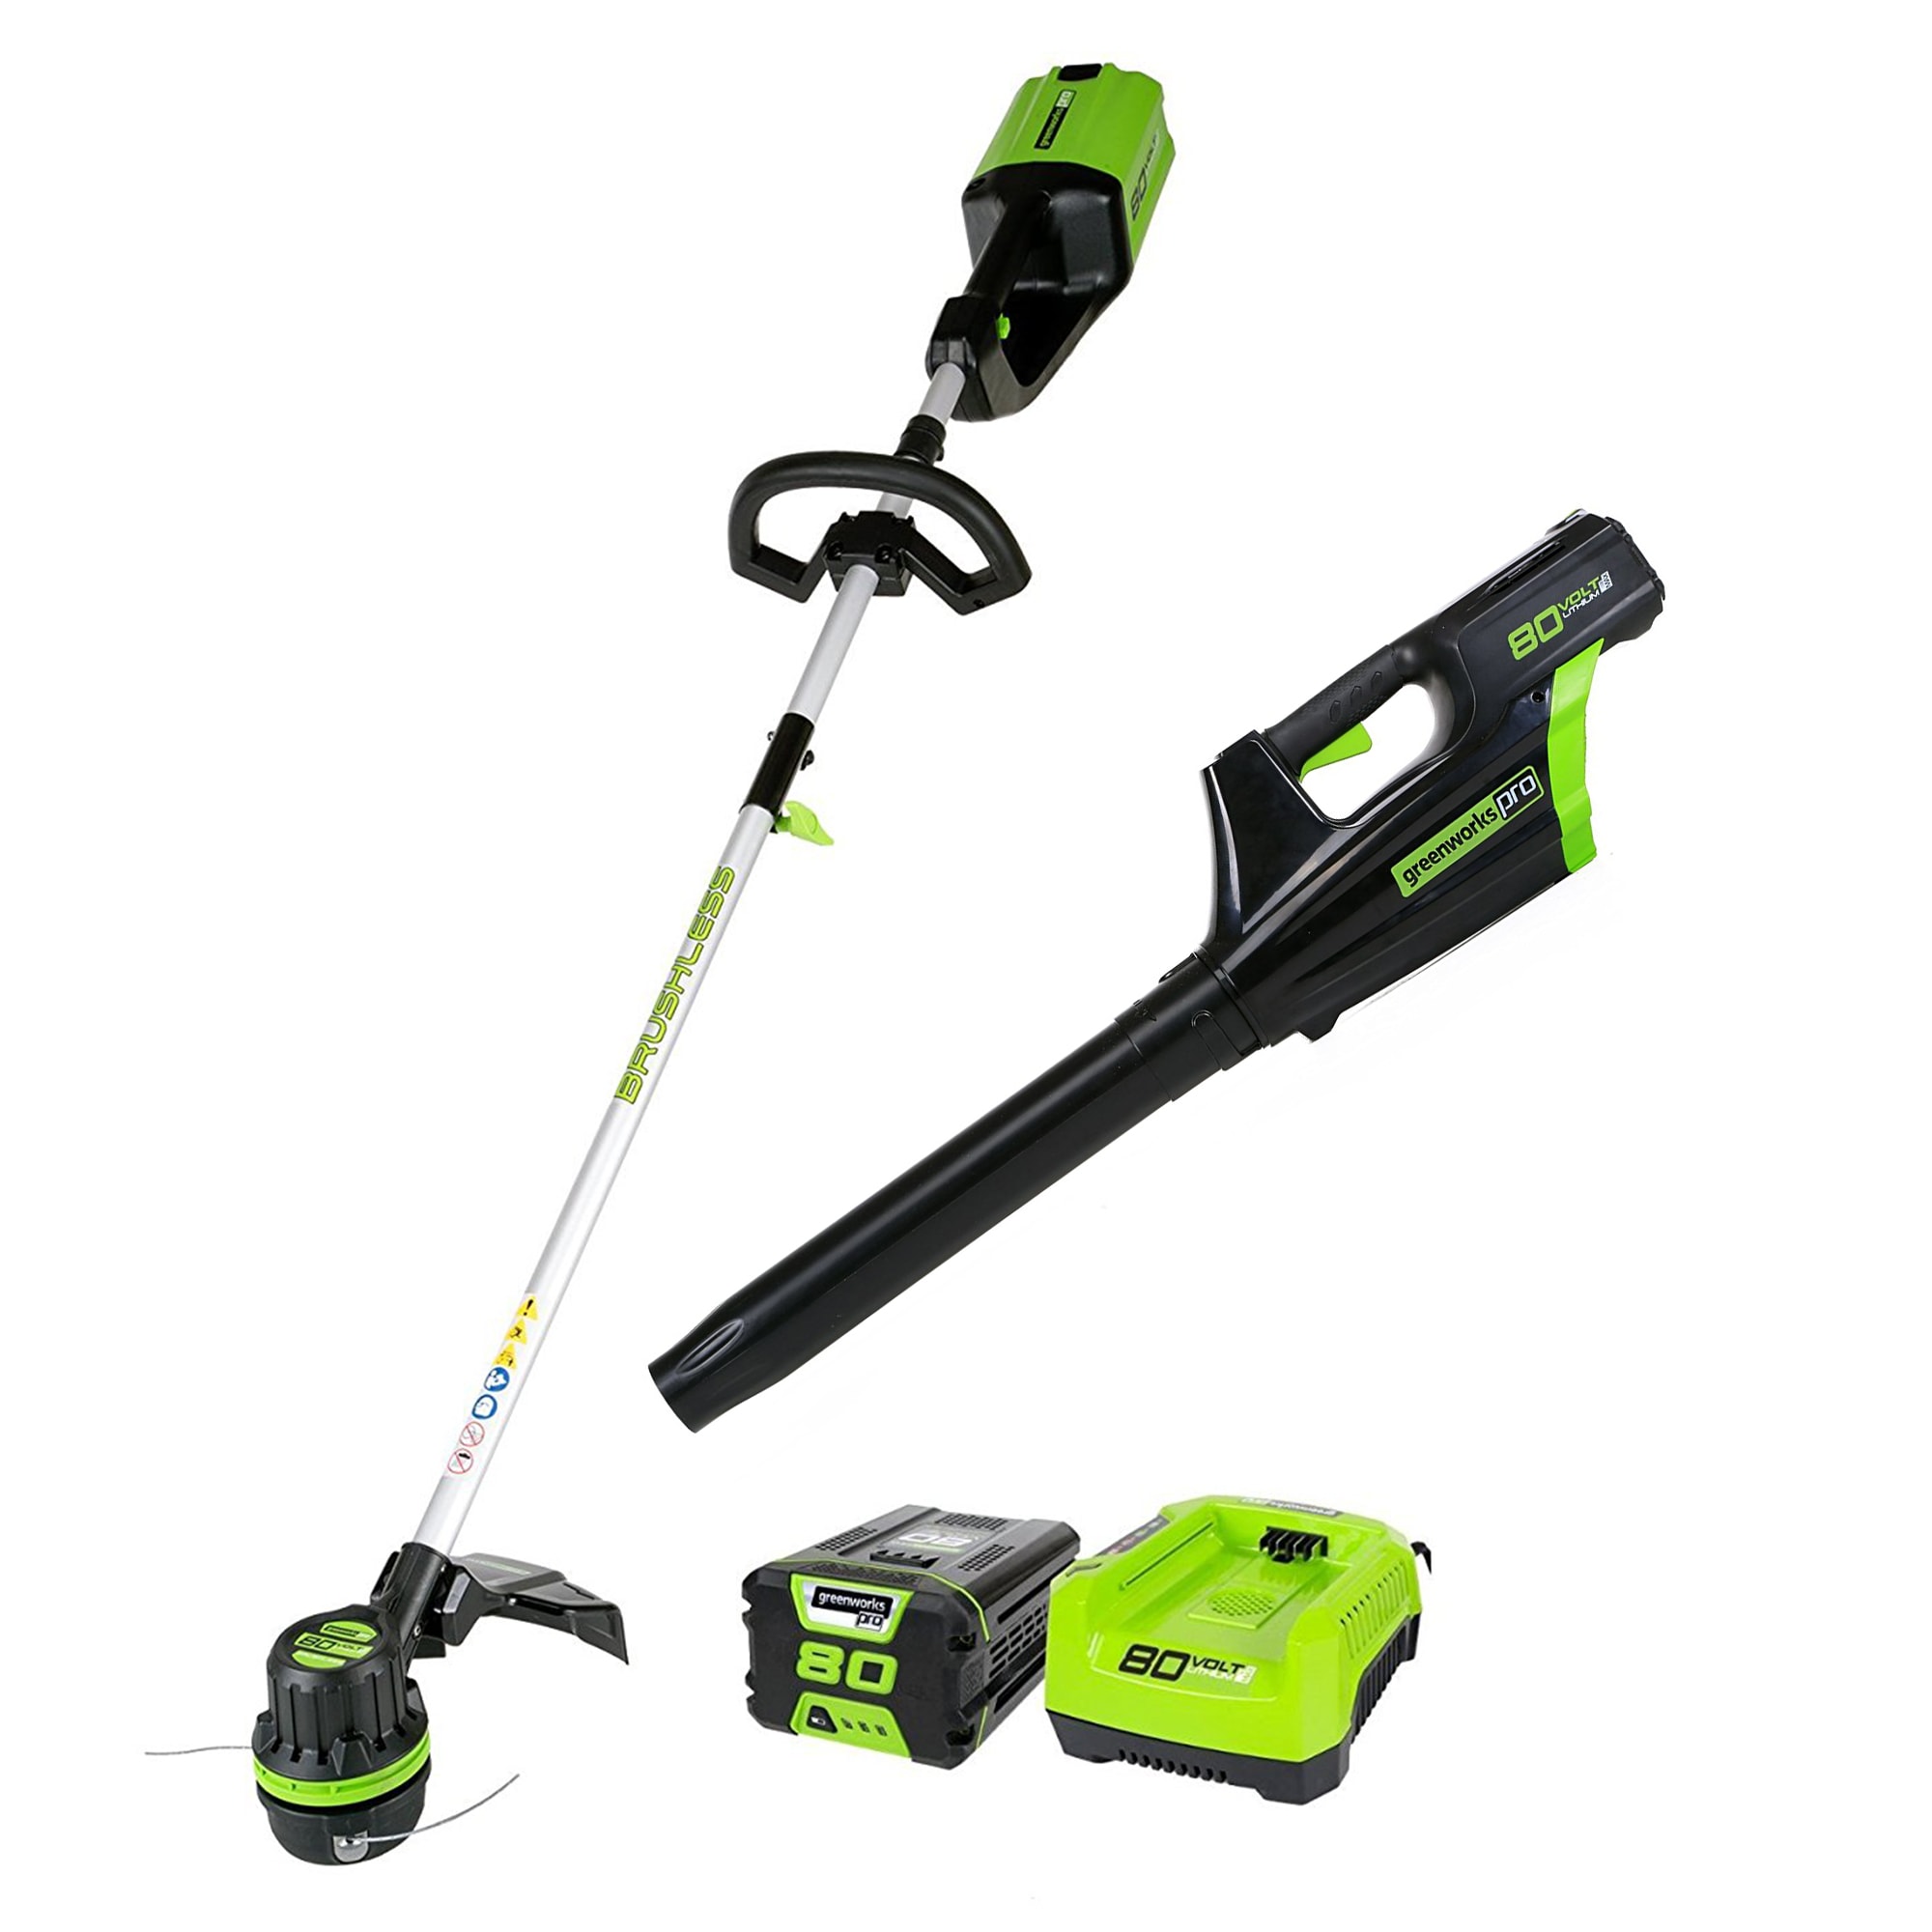 2Ah Battery Included STBA80L210 Greenworks PRO 80V Cordless Brushless String Trimmer Renewed Blower Combo 